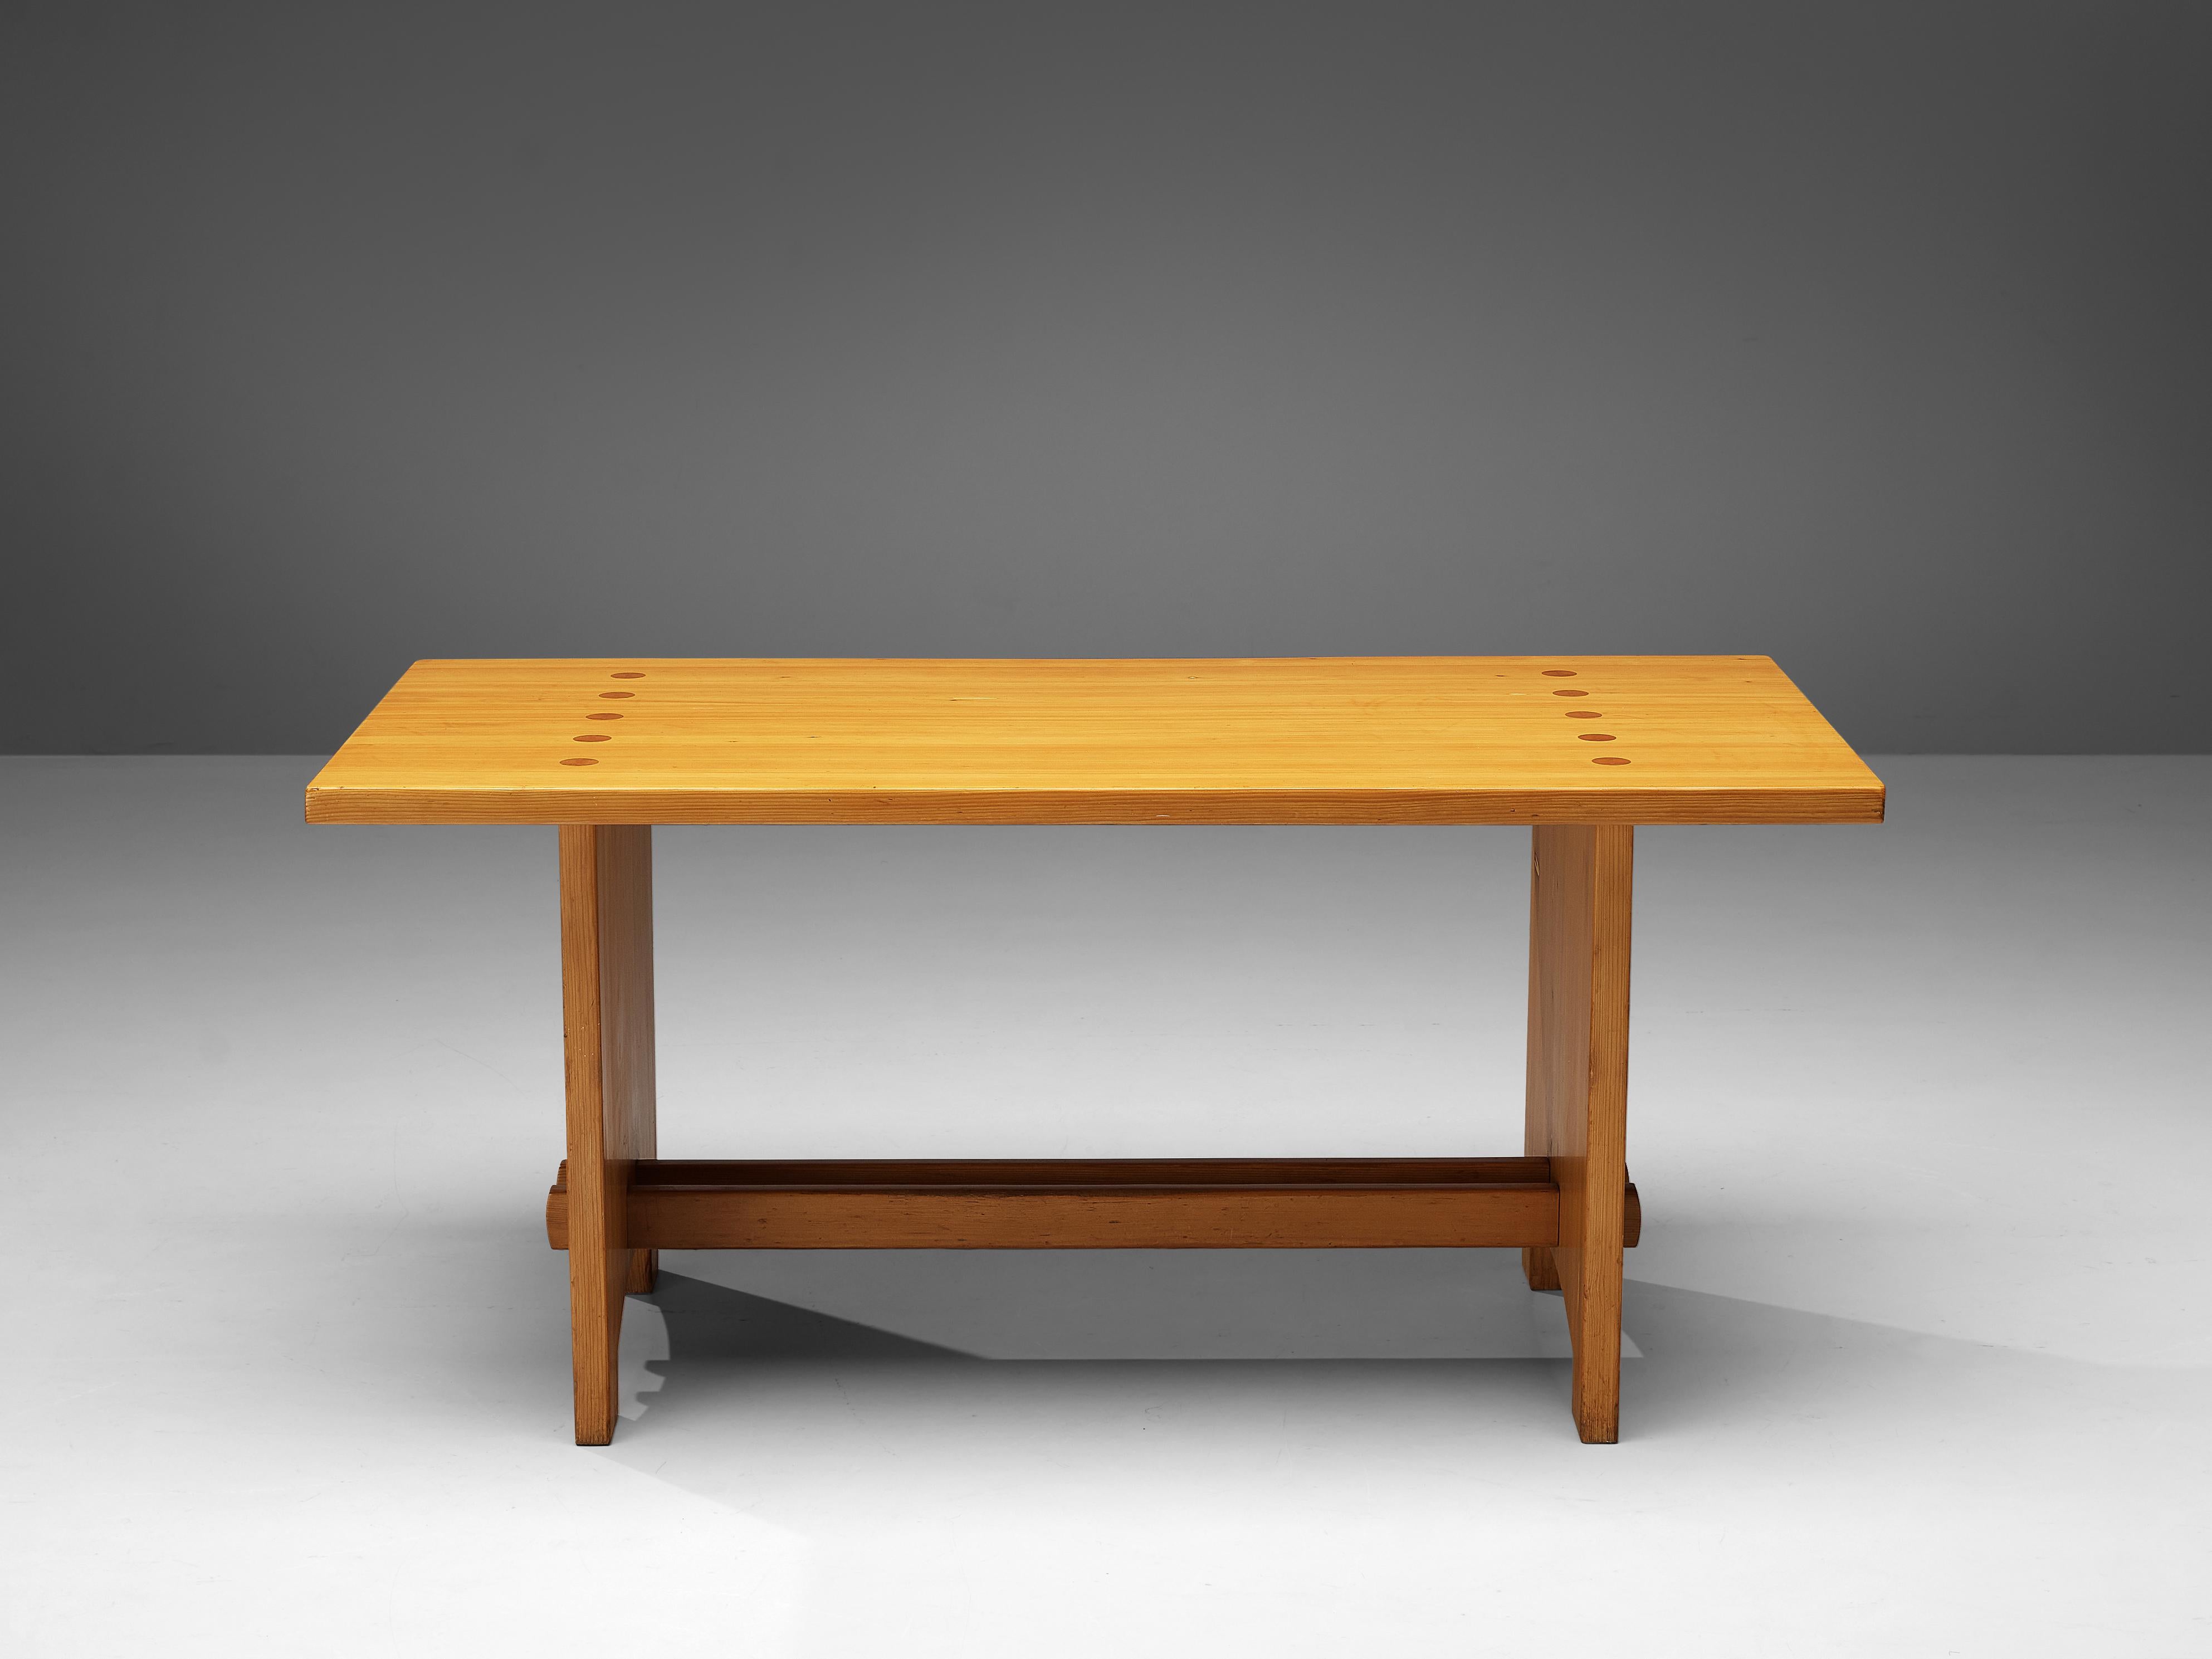 Danish Jacob Kielland-Brandt Dining Table in Solid Pine For Sale